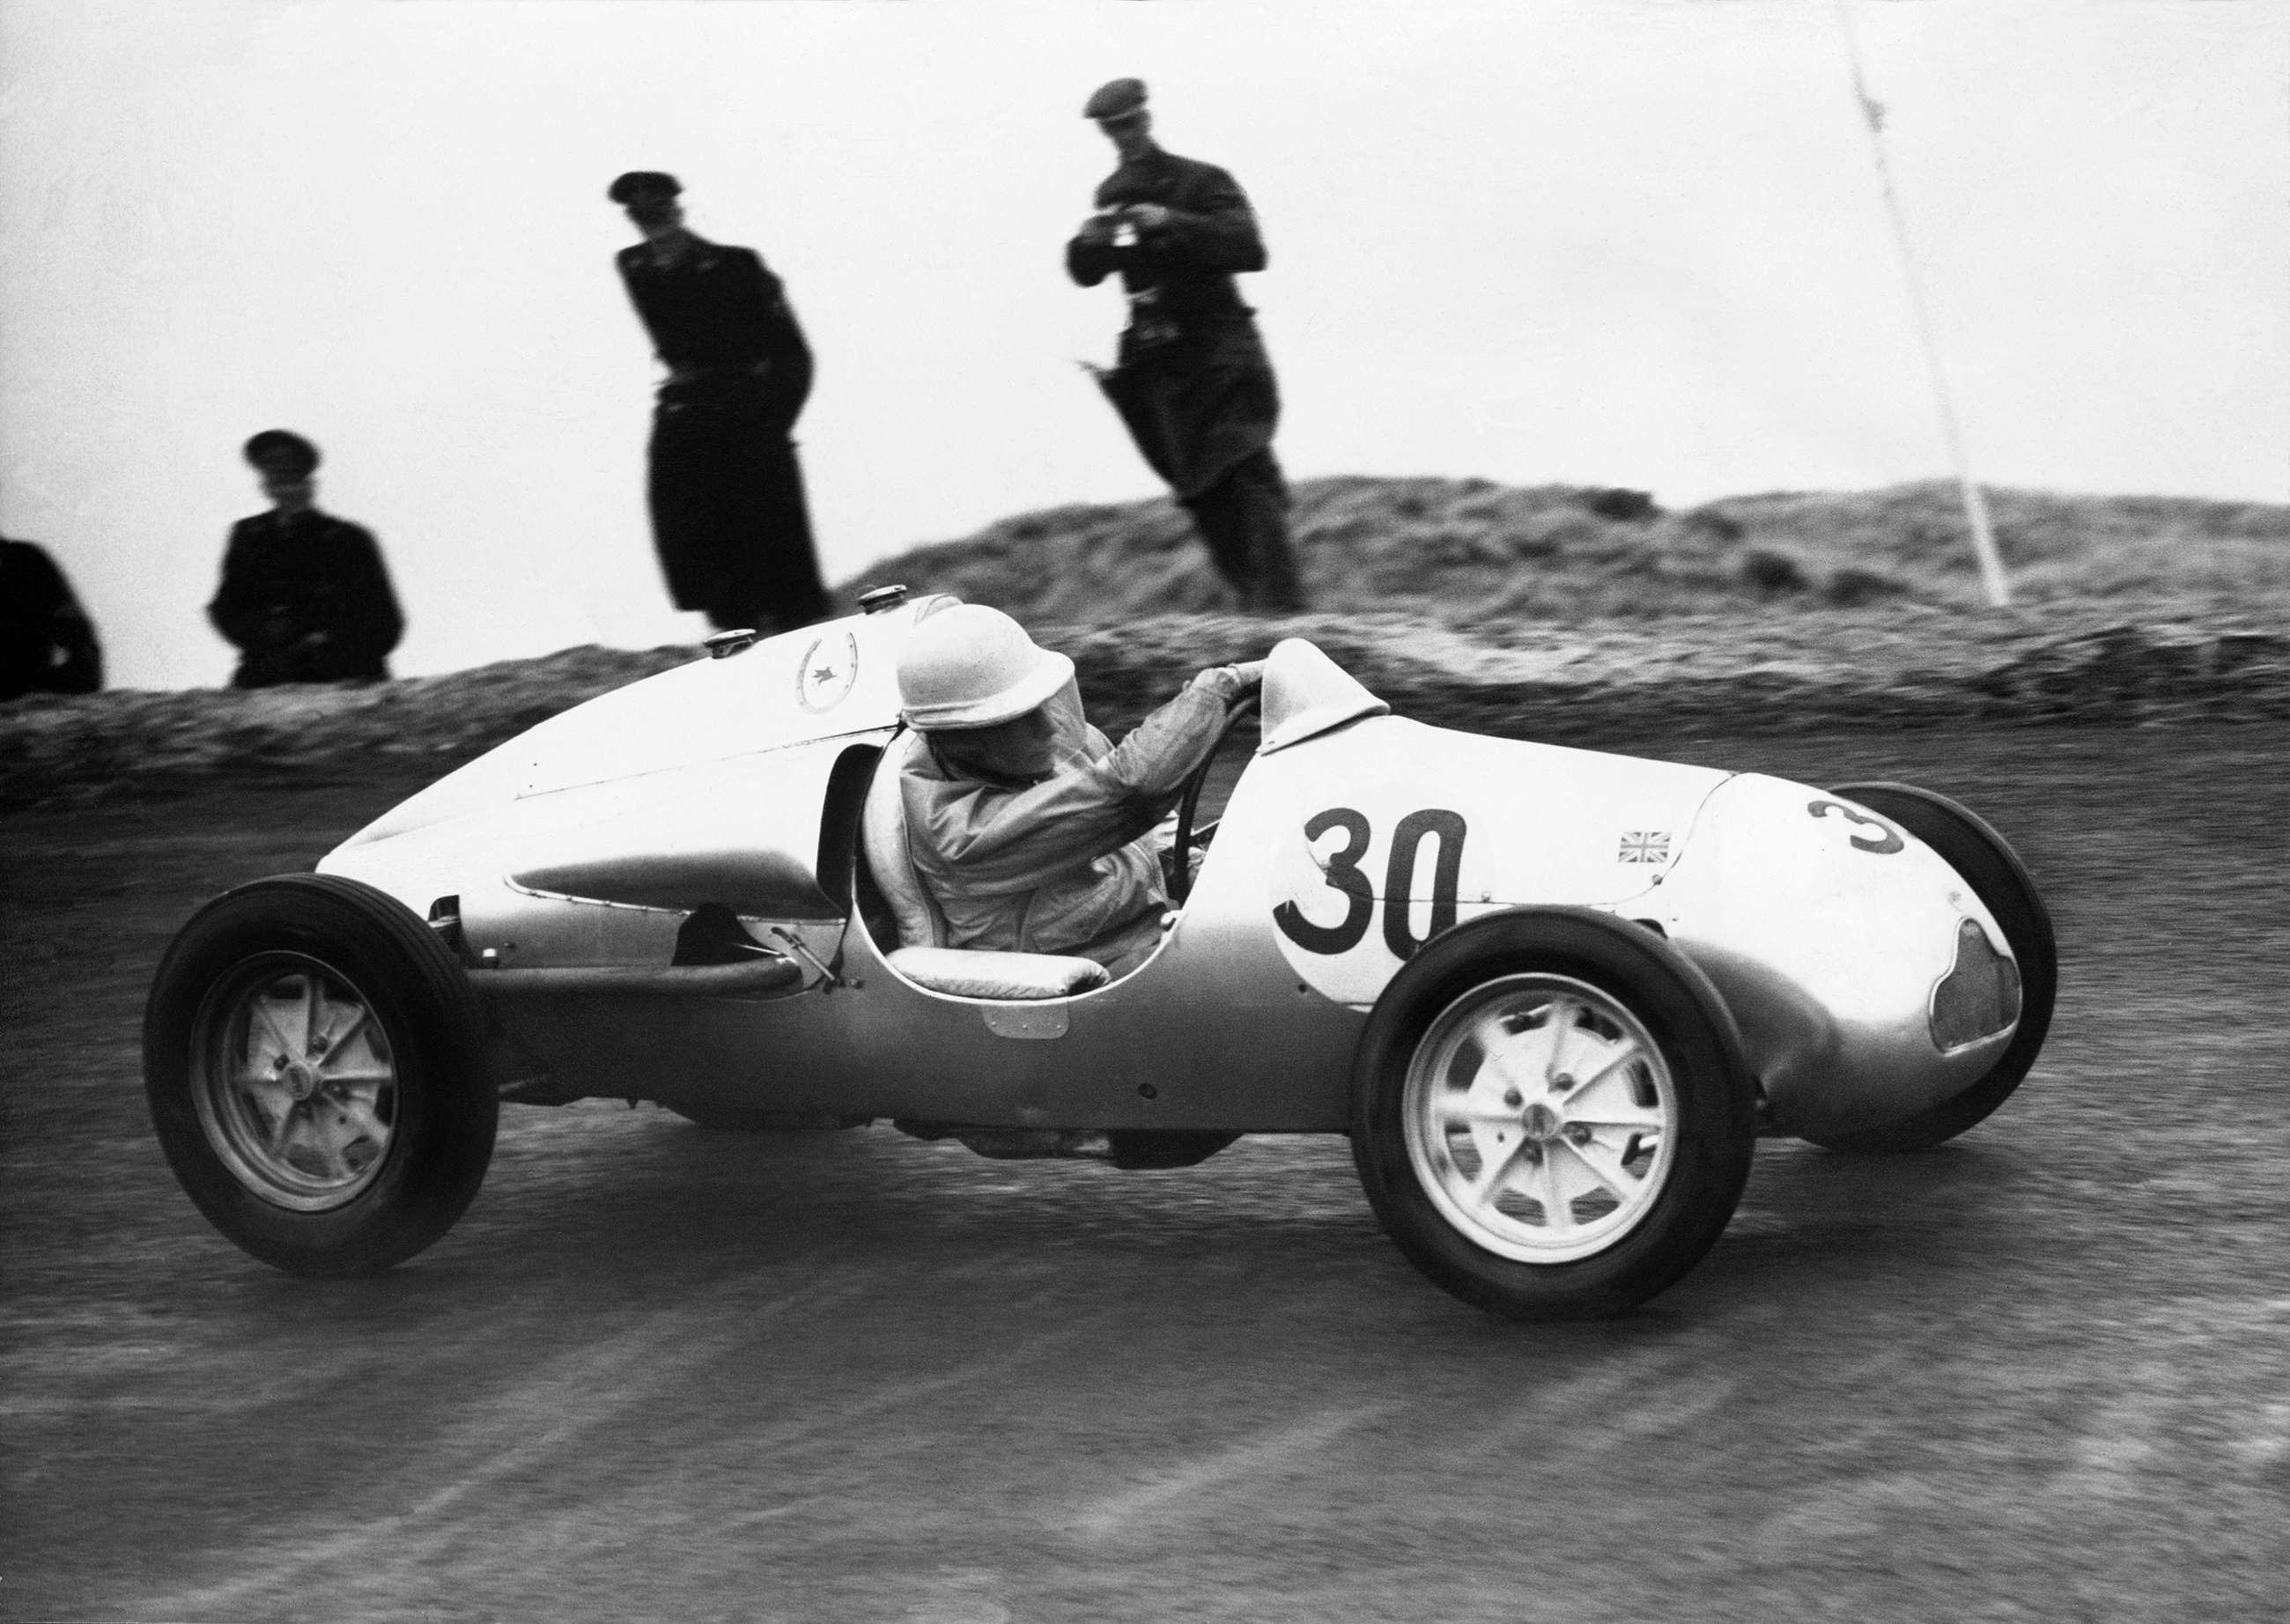 Top, Jack Brabham driving a Cooper T53-Climax in Monaco, 1960. Above, Stirling Moss driving a Cooper-JAP MkIII at Zandvoort, 1949. 